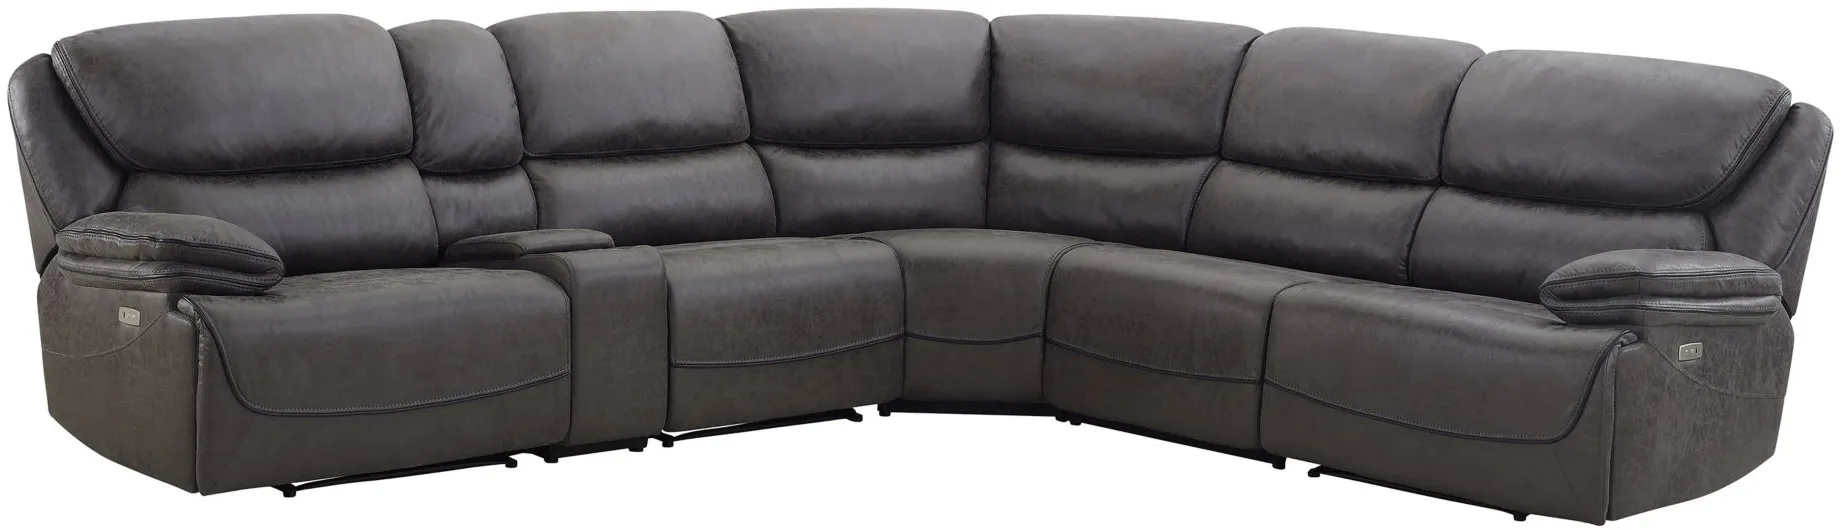 Plaza 6-Piece Sectional in Smoke Gray by Steve Silver Co.